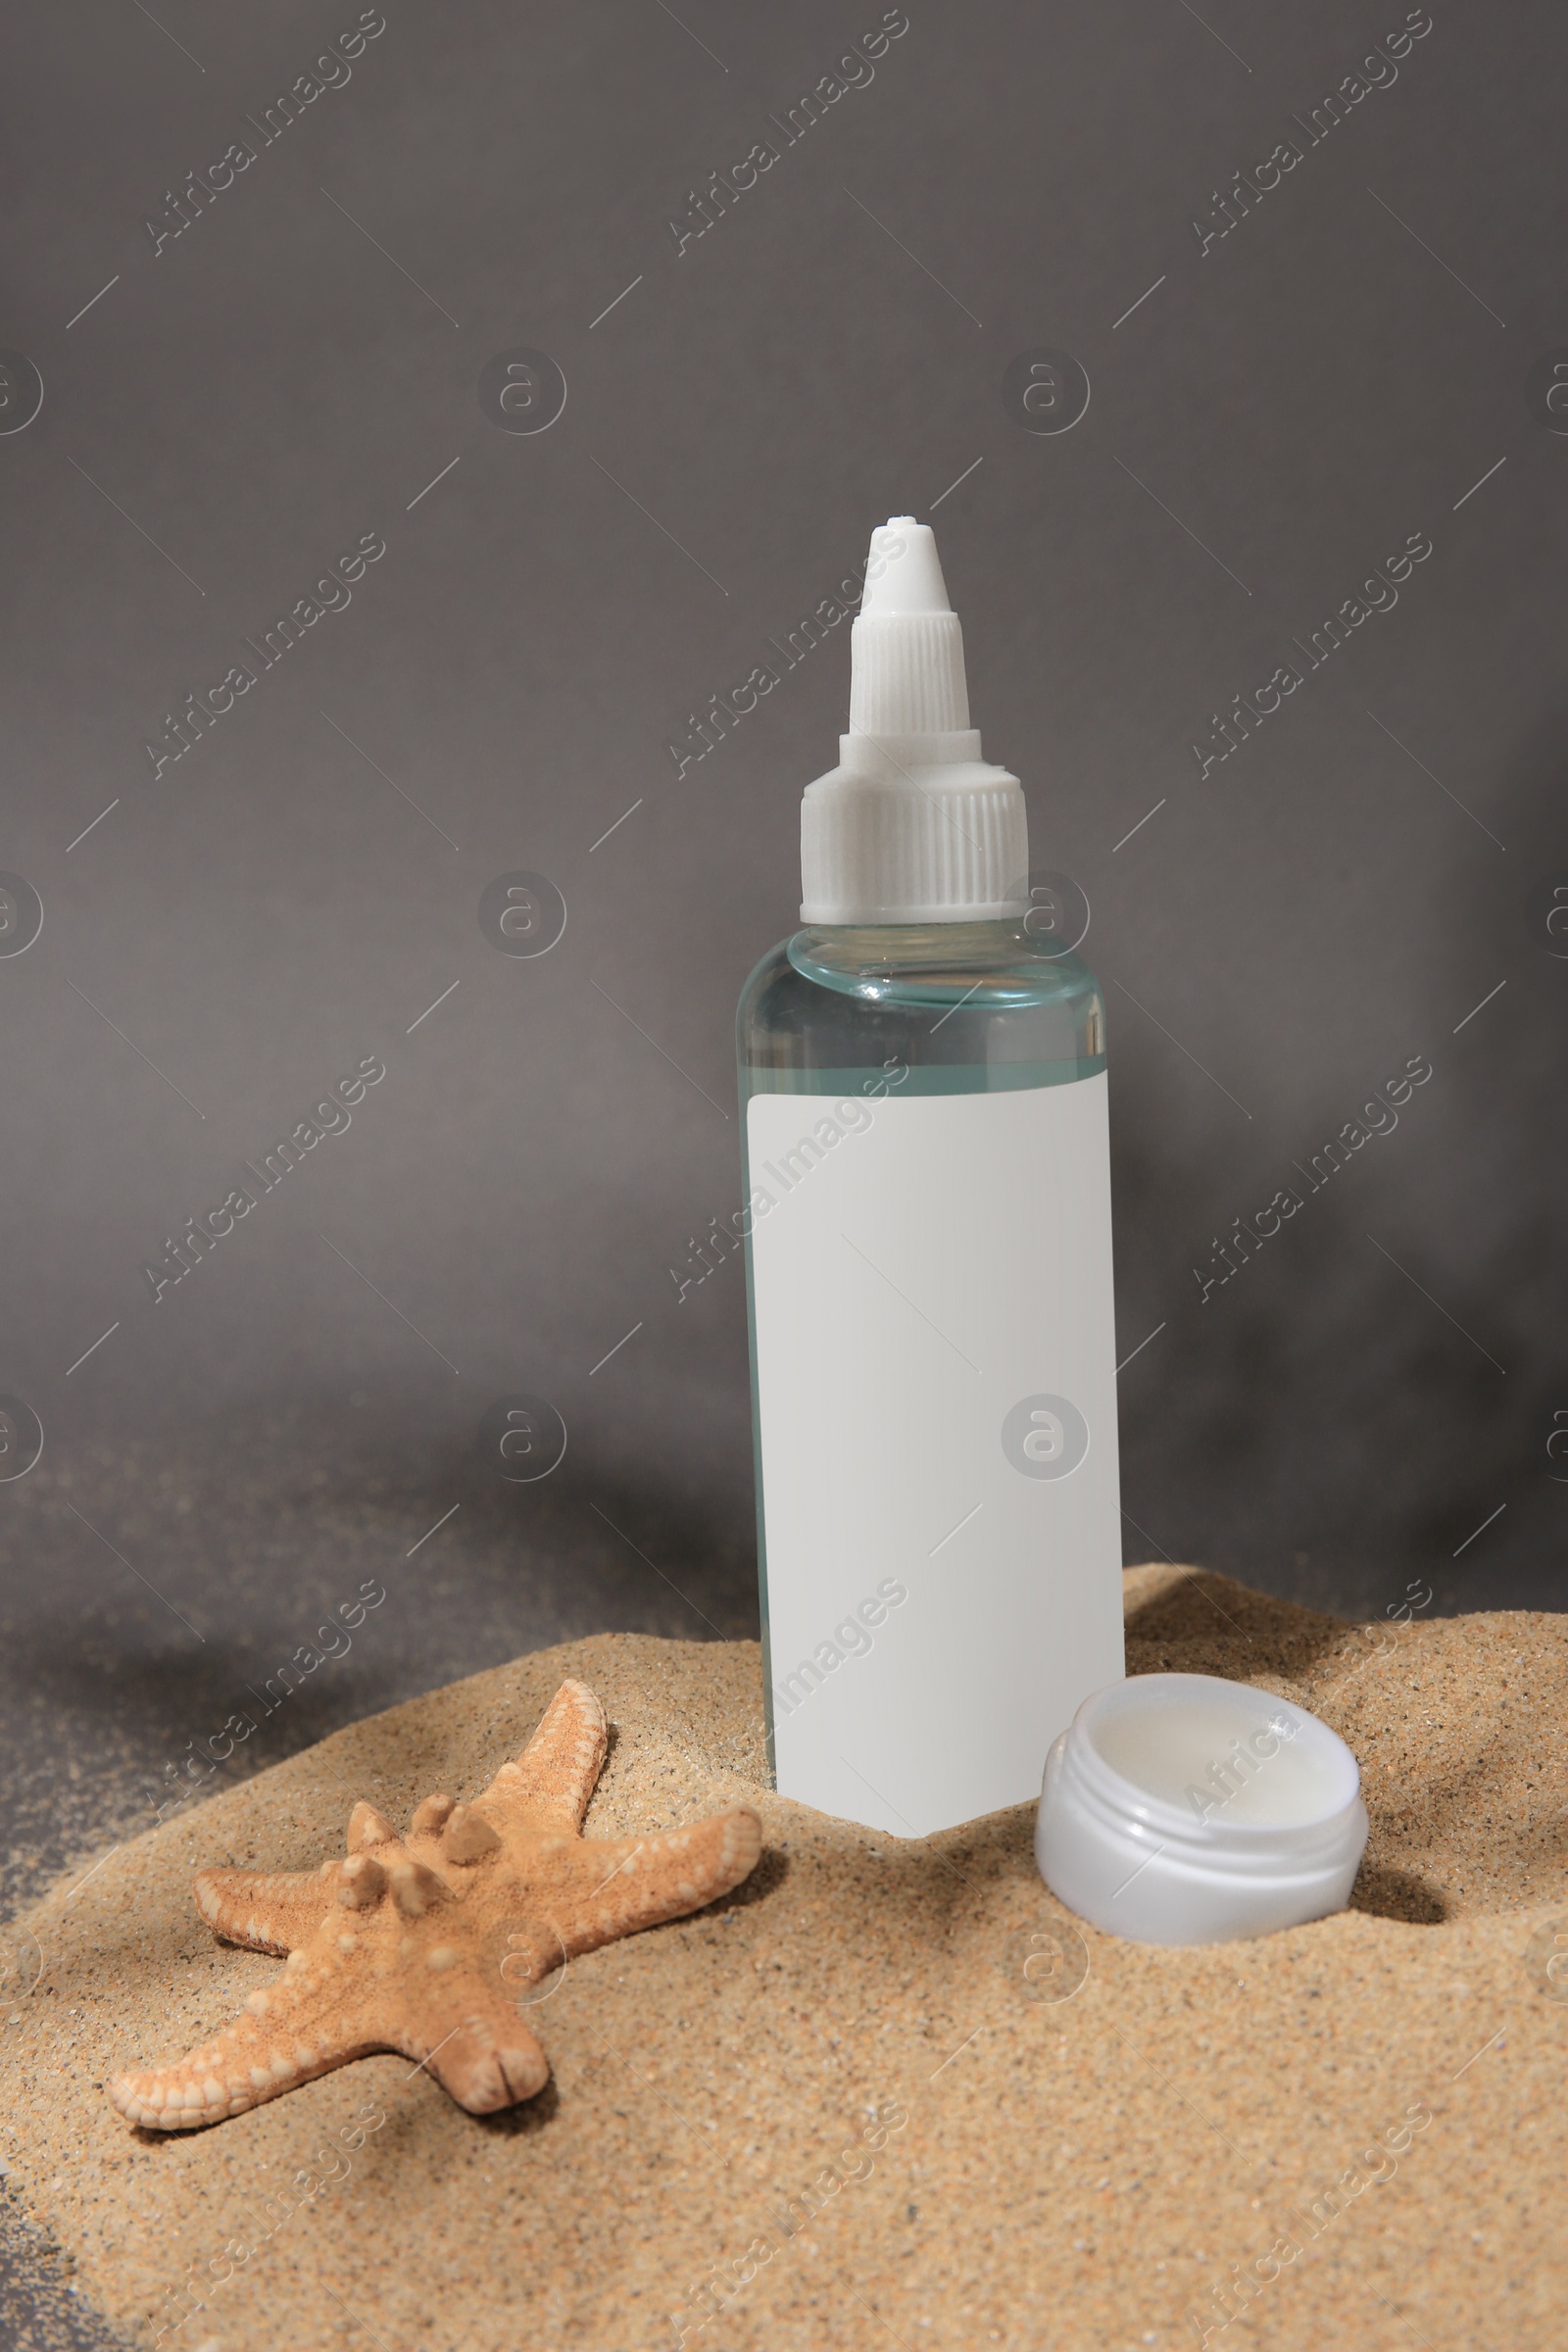 Photo of Cosmetic products and starfish on sand against grey background